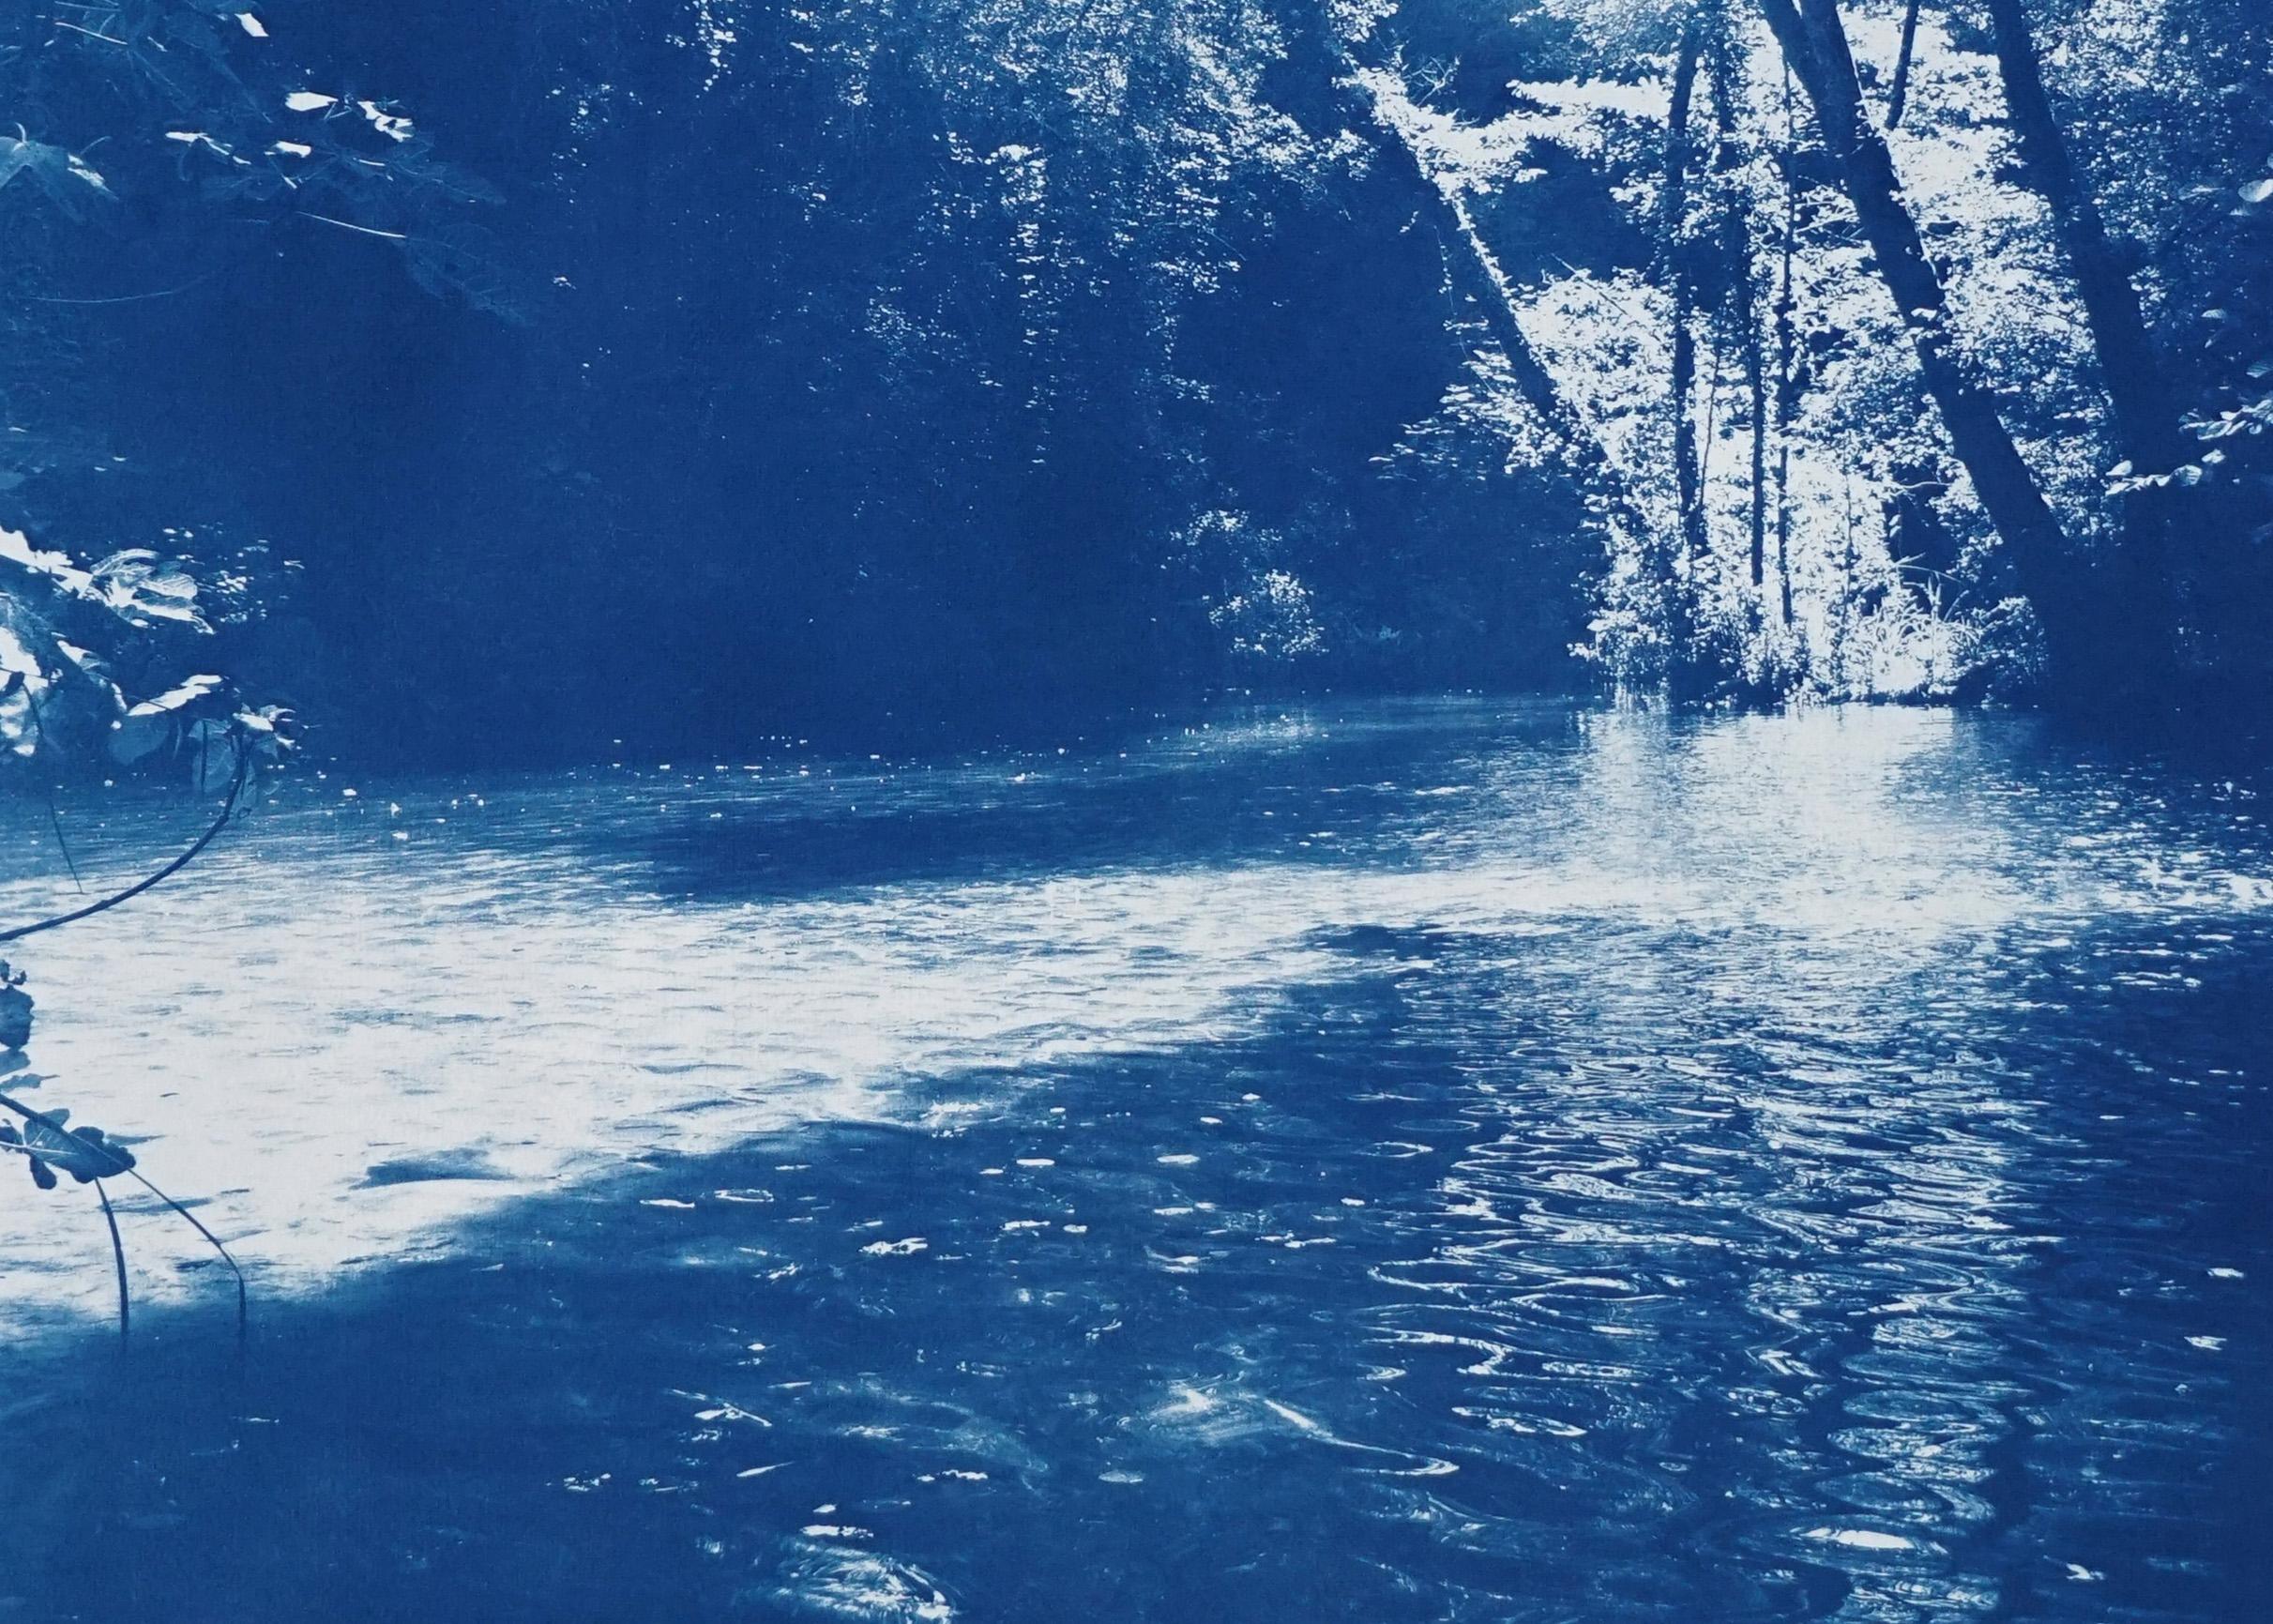 This is an exclusive handprinted limited edition cyanotype.
Lovely scene of a hidden pond in a Scandinavian forest.  

Details:
+ Title: Scandinavian Enchanted Forest
+ Year: 2019
+ Edition Size: 50
+ Stamped and Certificate of Authenticity